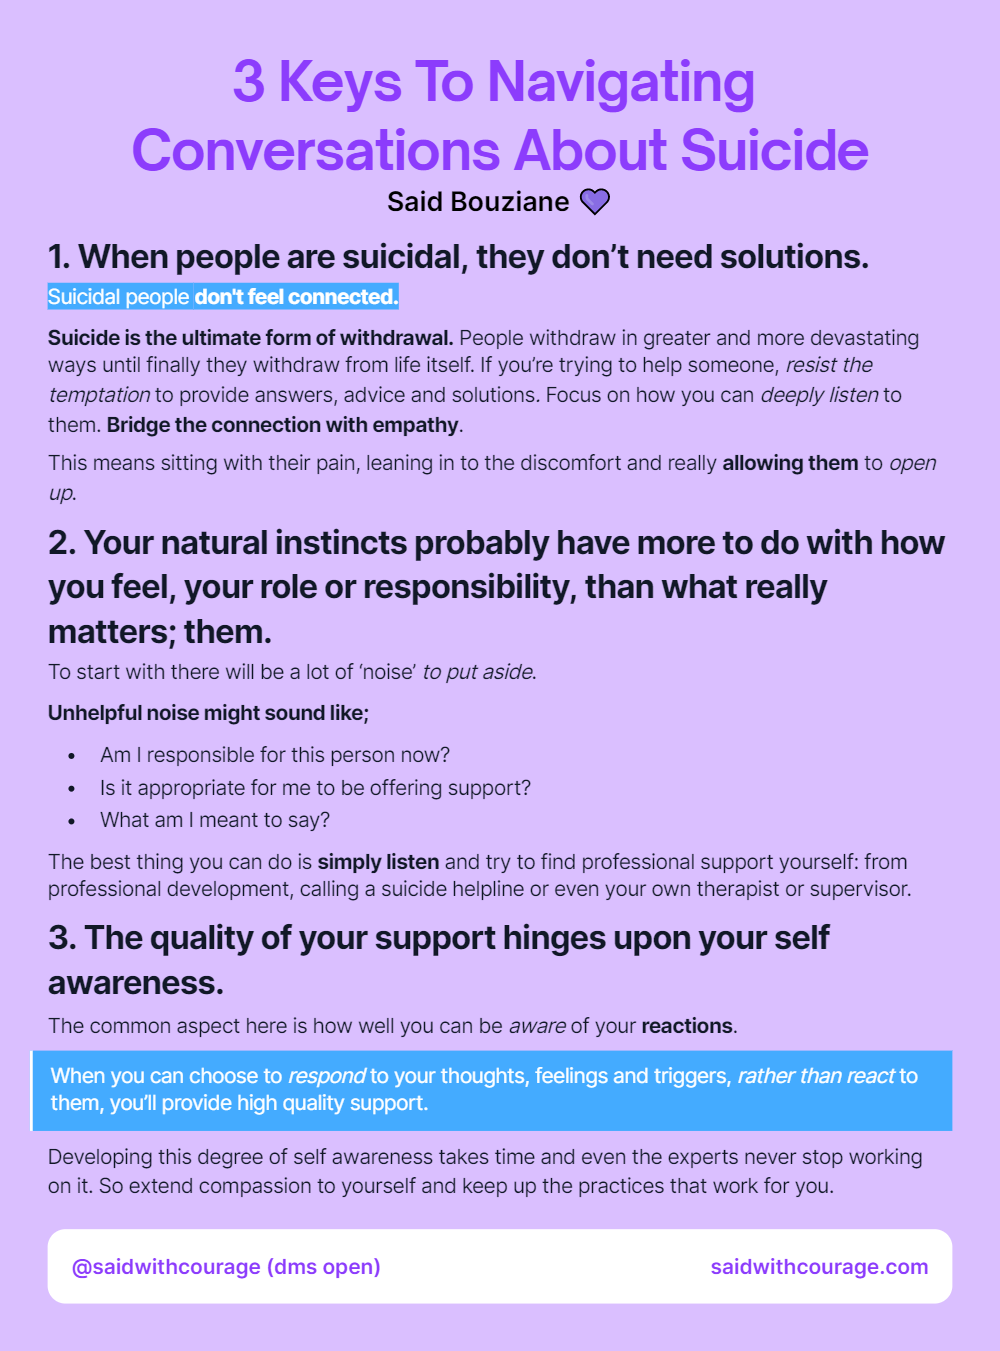 3 Keys To Navigating Conversations About Suicide